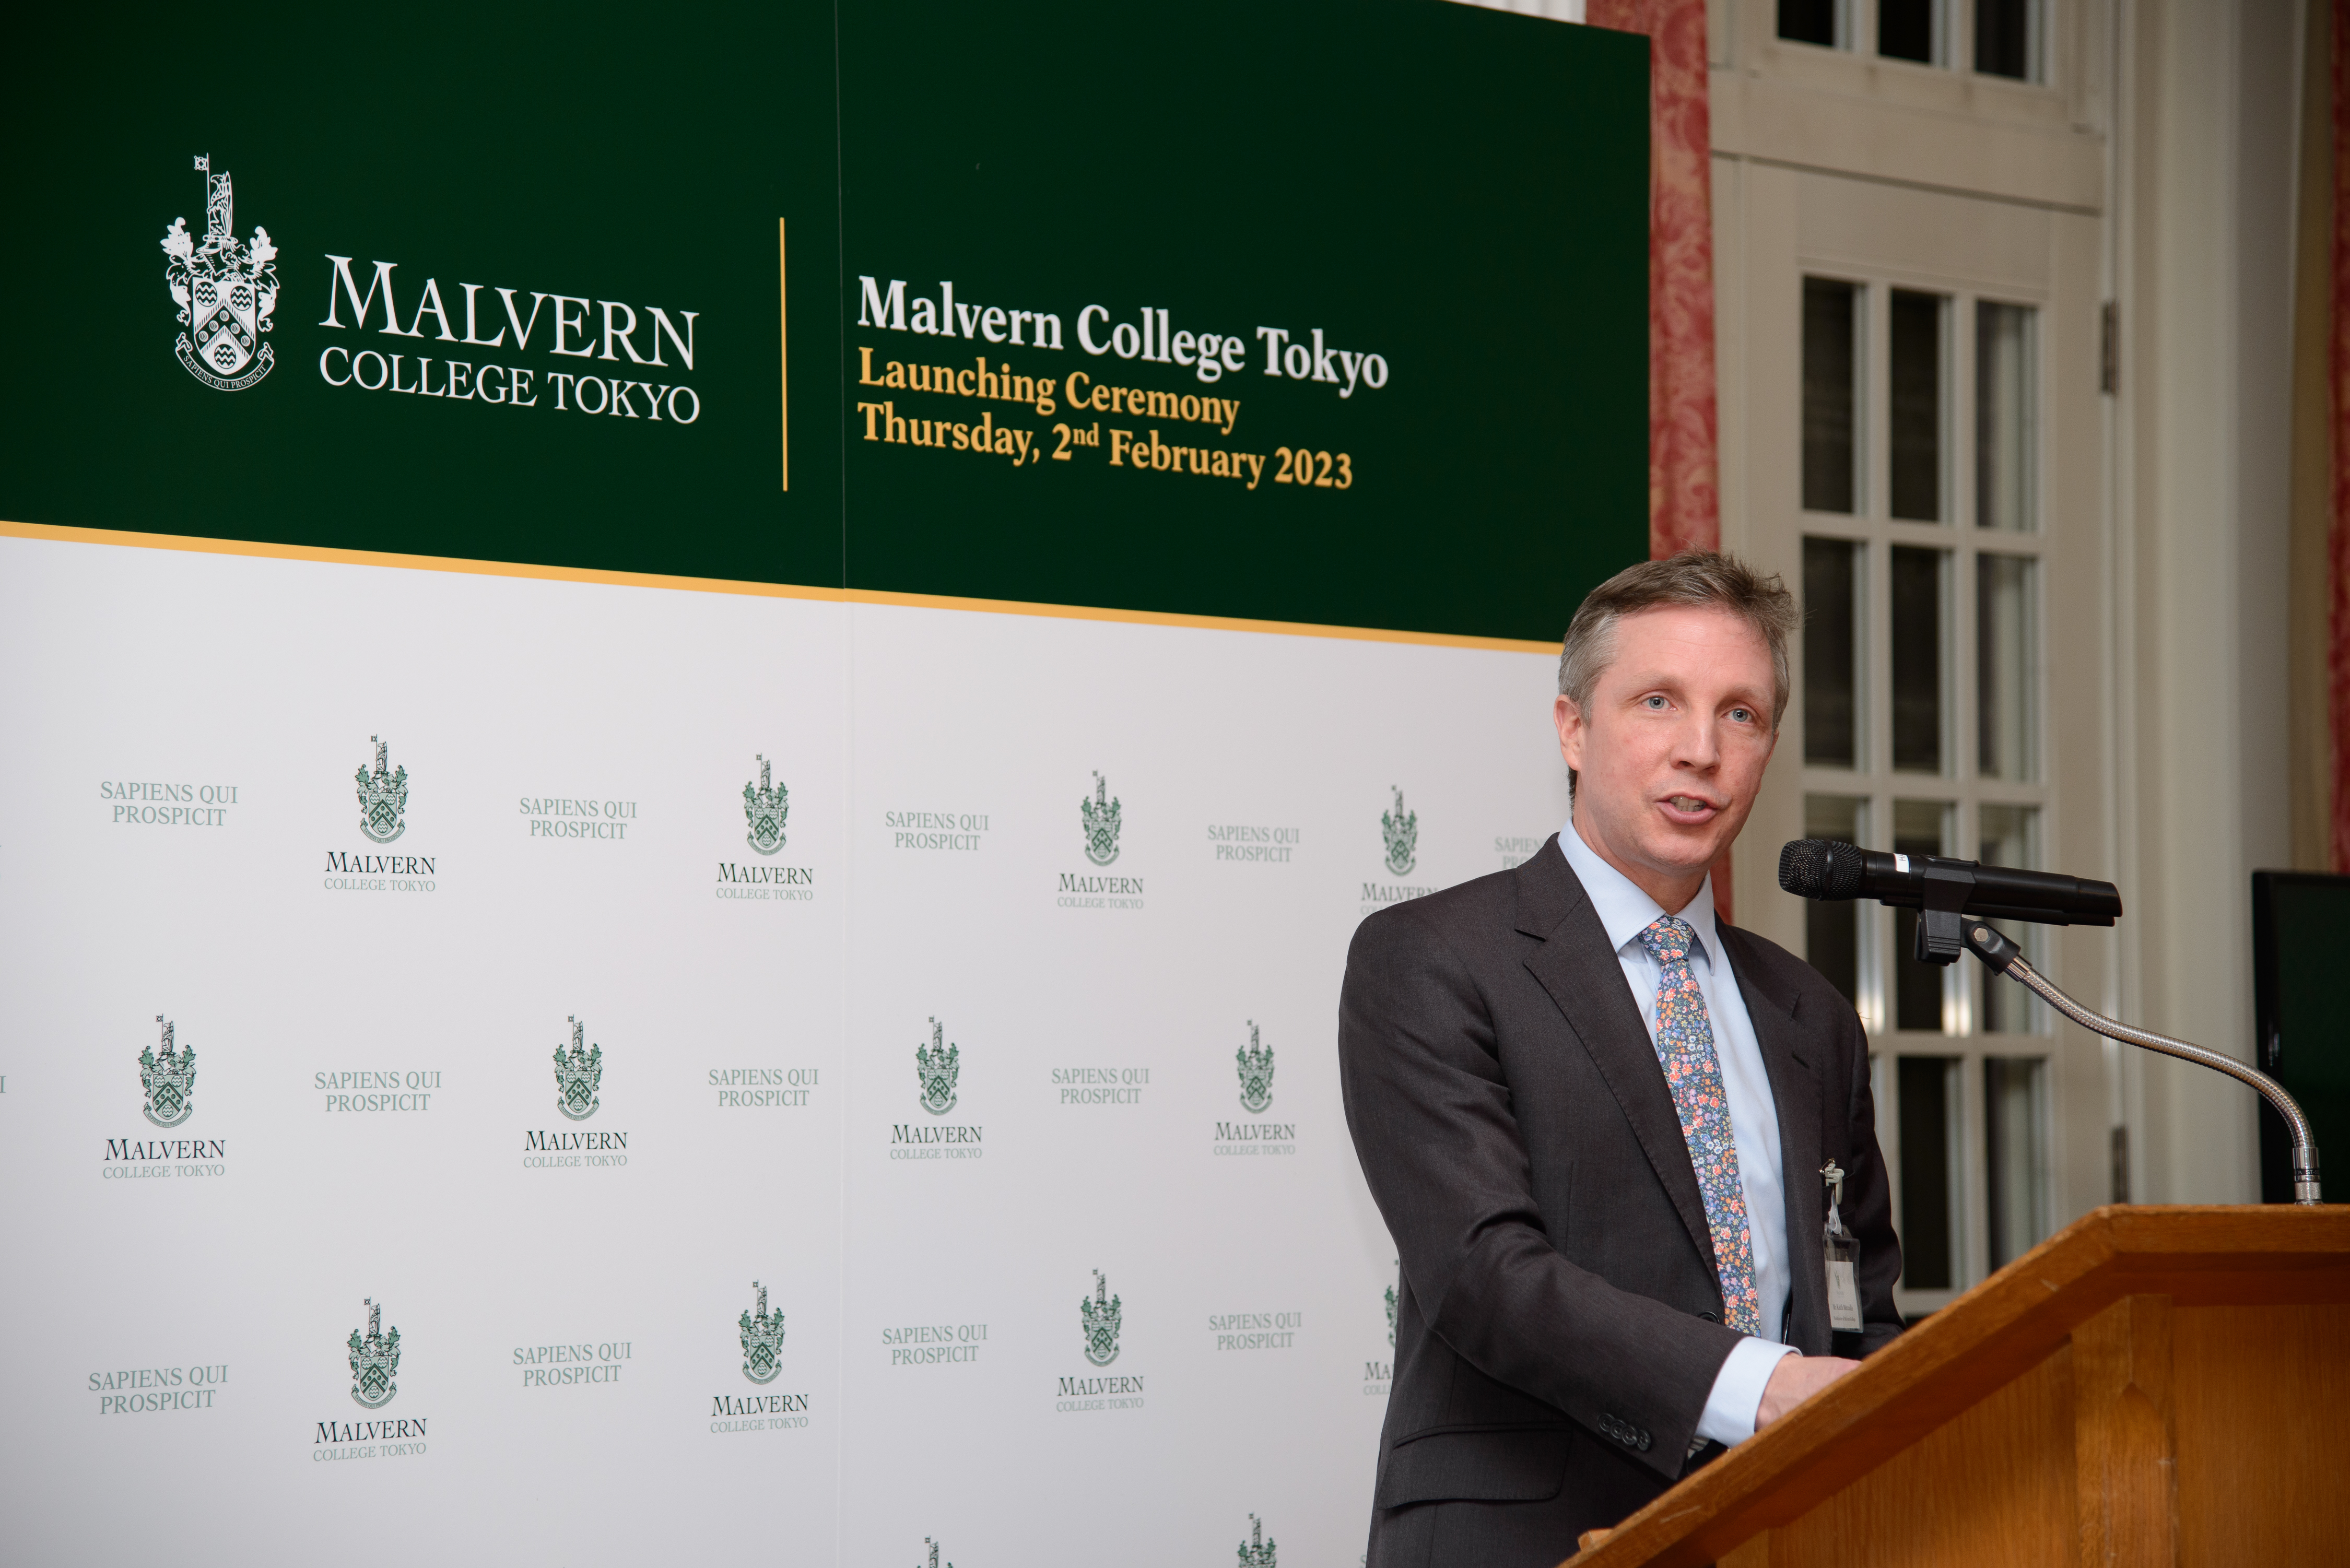 Mr Keith Metcalfe, Headmaster of Malvern College shared the history of Malvern College and explained the ethos that lies at the heart of a Malvern Education